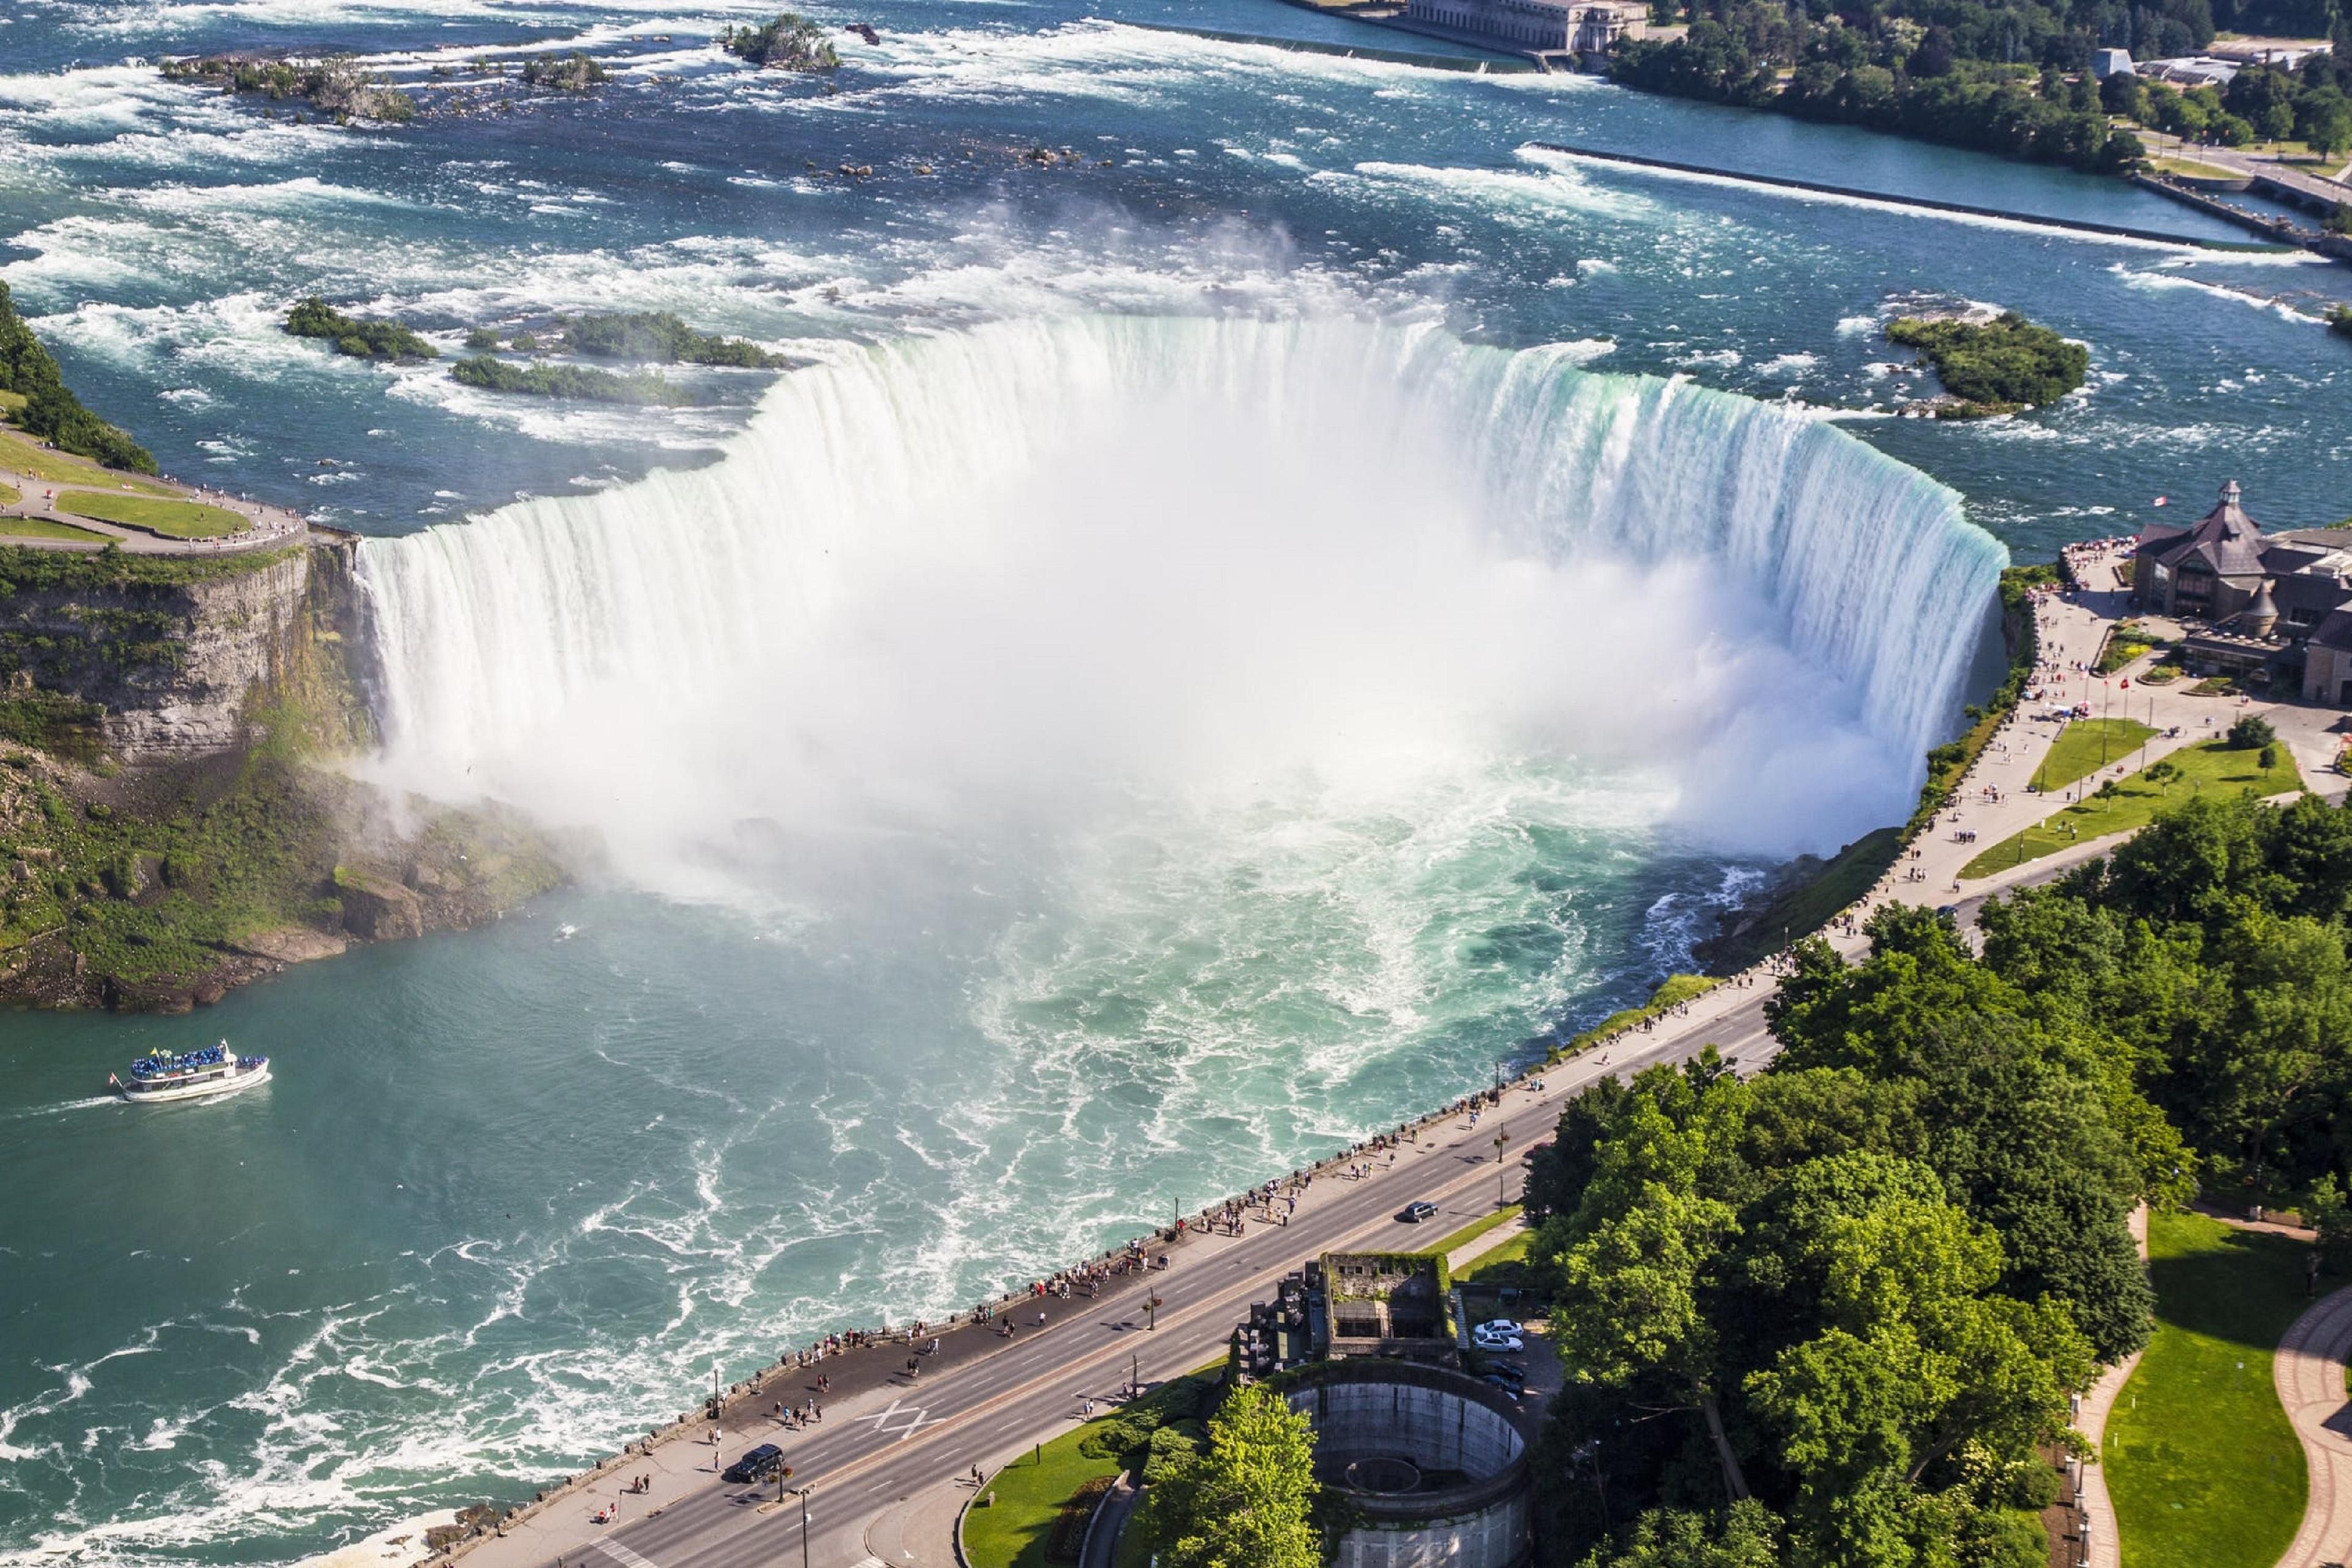 The beautiful Niagara Falls is a must-see for anyone visiting Buffalo. Just 22 miles away, it’s a short drive to experience world-class views, shopping, tours, and outdoor adventures. You don’t want to miss this!